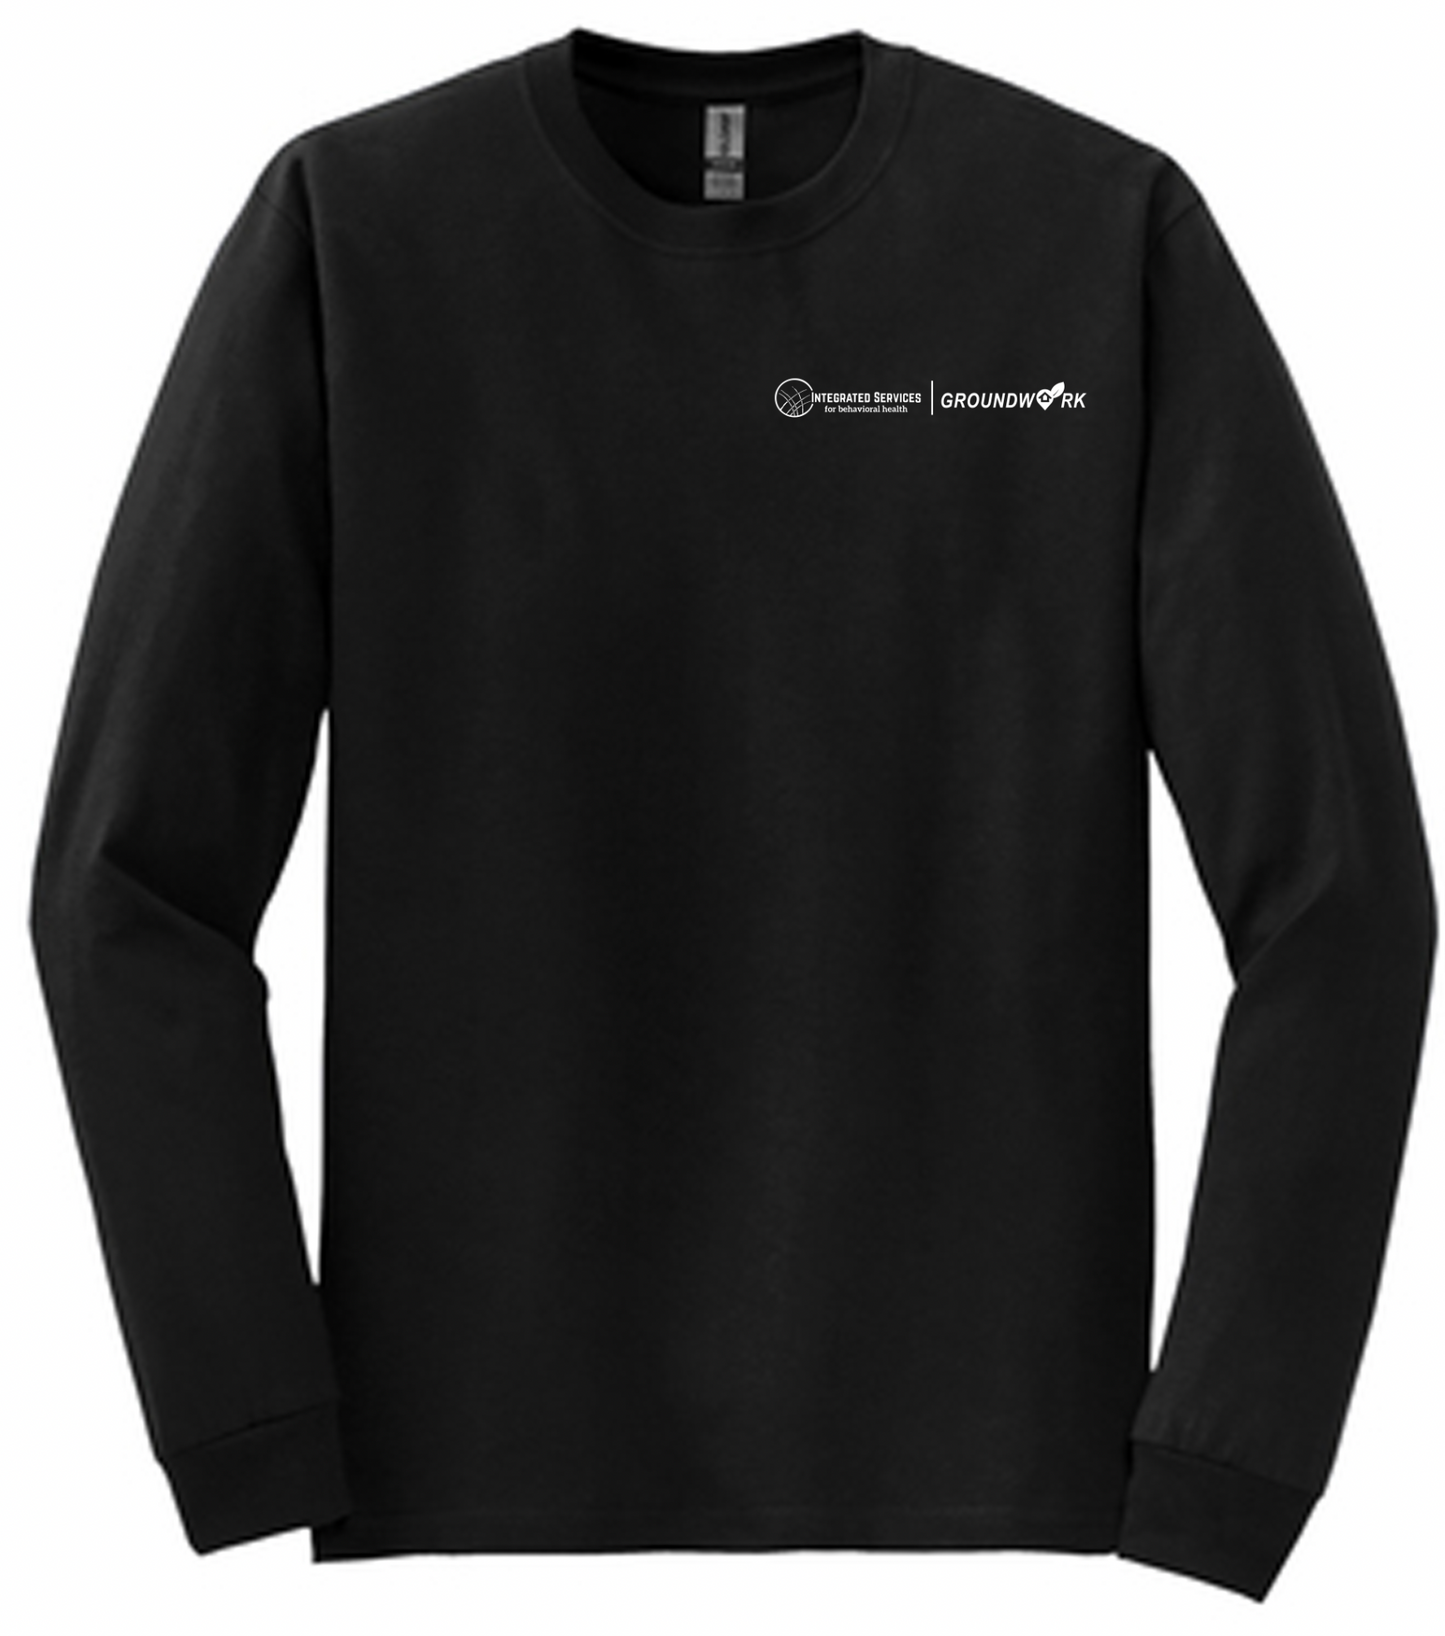 Left Chest Logo - Integrated Services Groundworks Long Sleeve T-Shirt